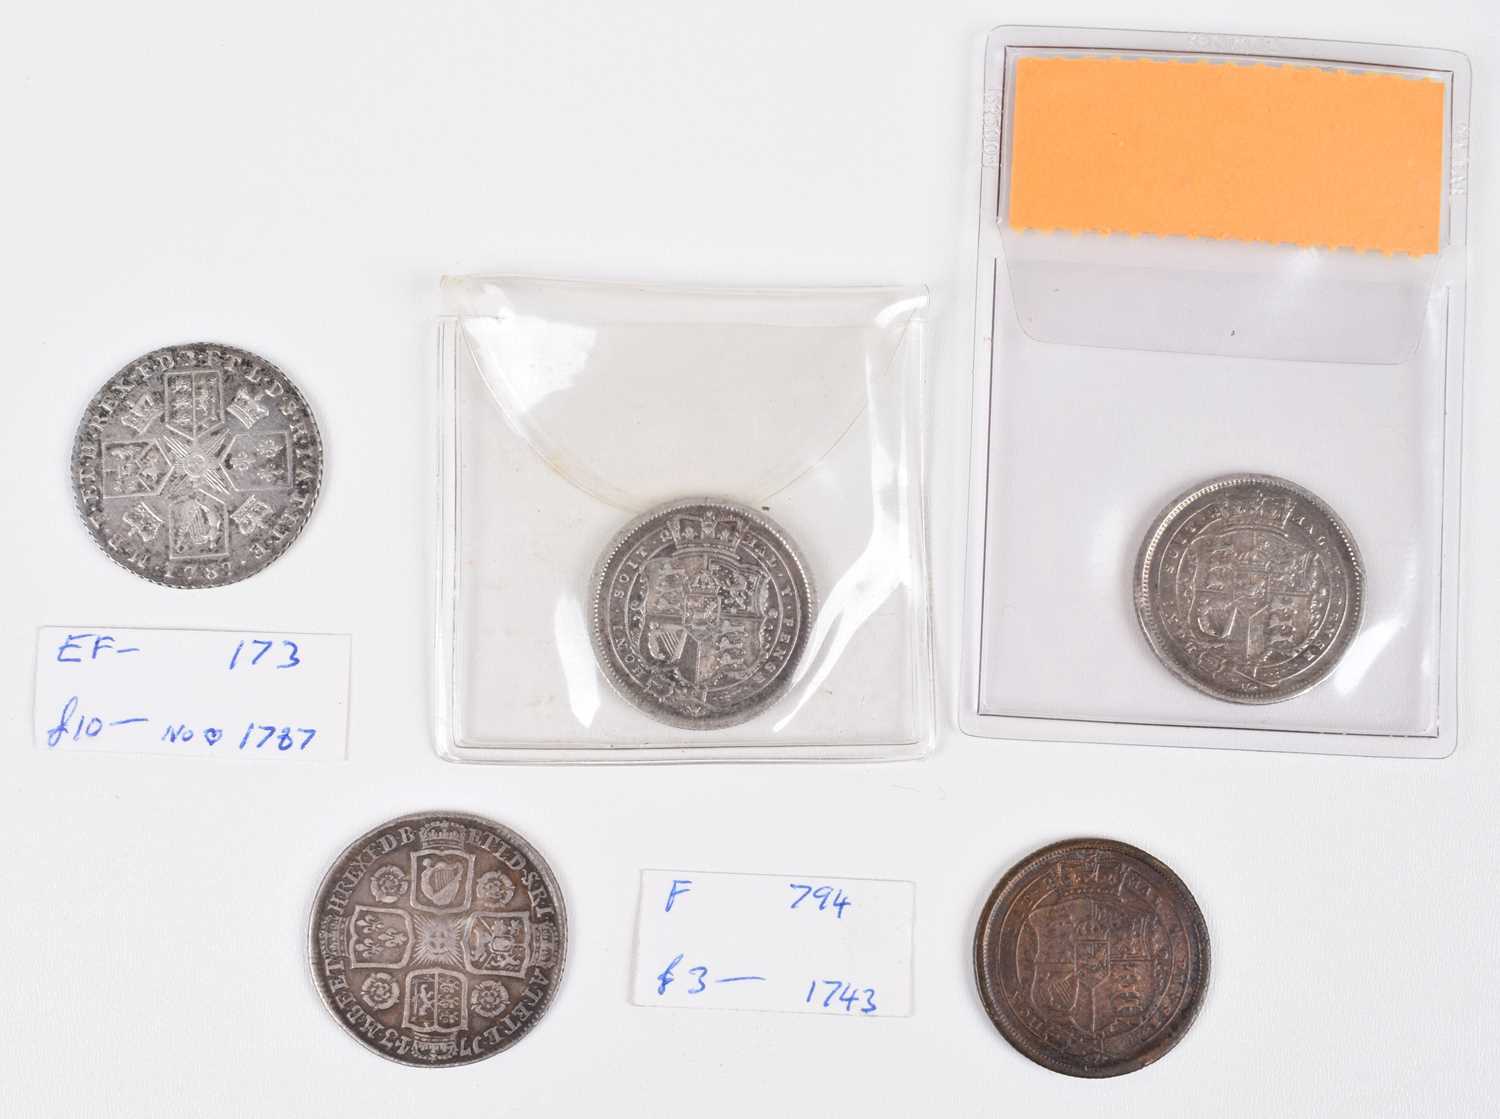 George II Shilling, Three George III Shillings and one counterfeit George III Shilling (5). - Image 2 of 2